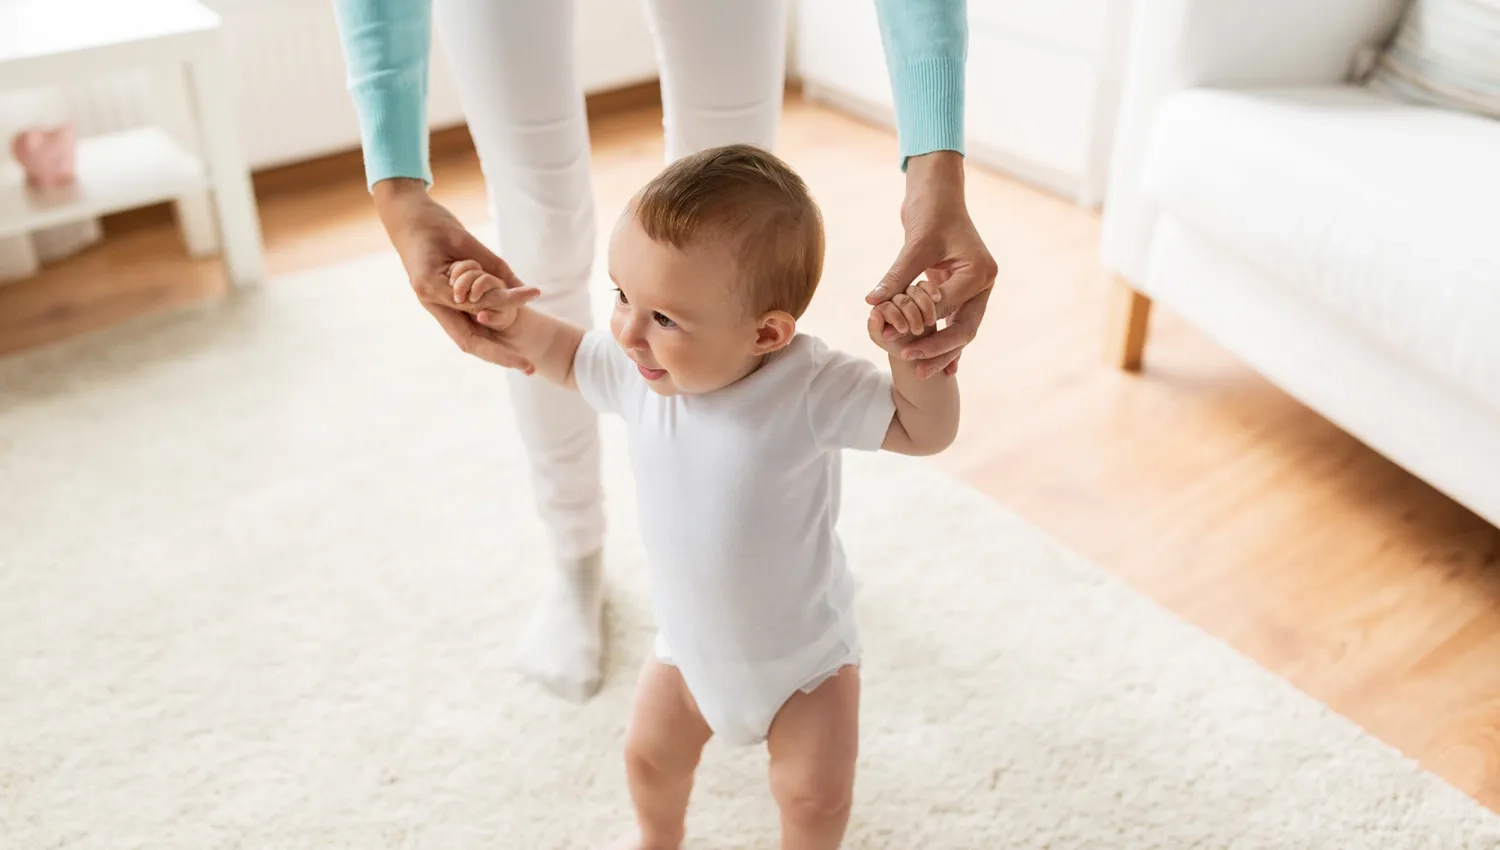 Have Your Baby Take Their First Steps in Good Health